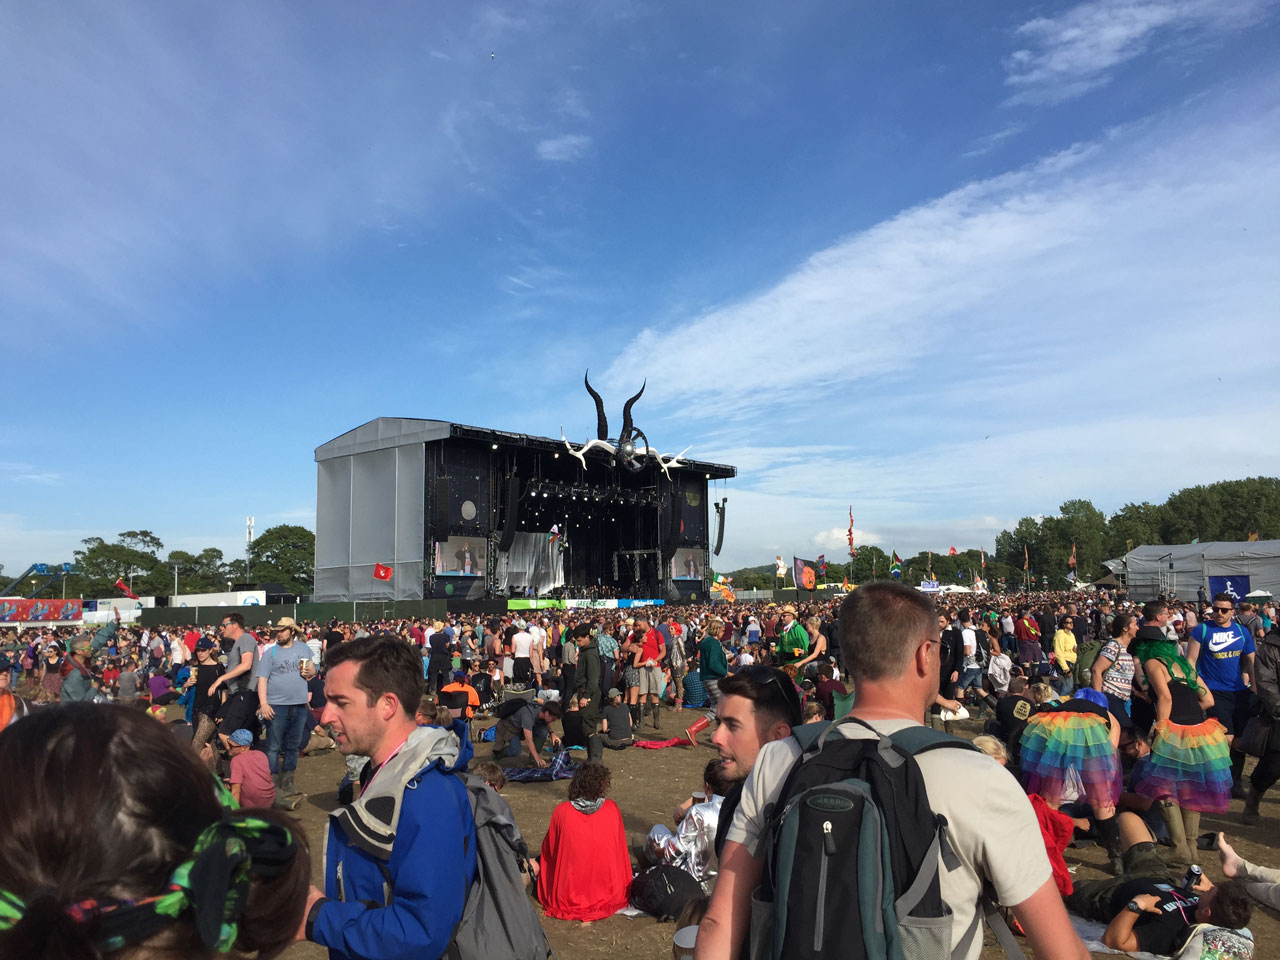 Sunny skies over the Other Stage, Glastonbury 2015